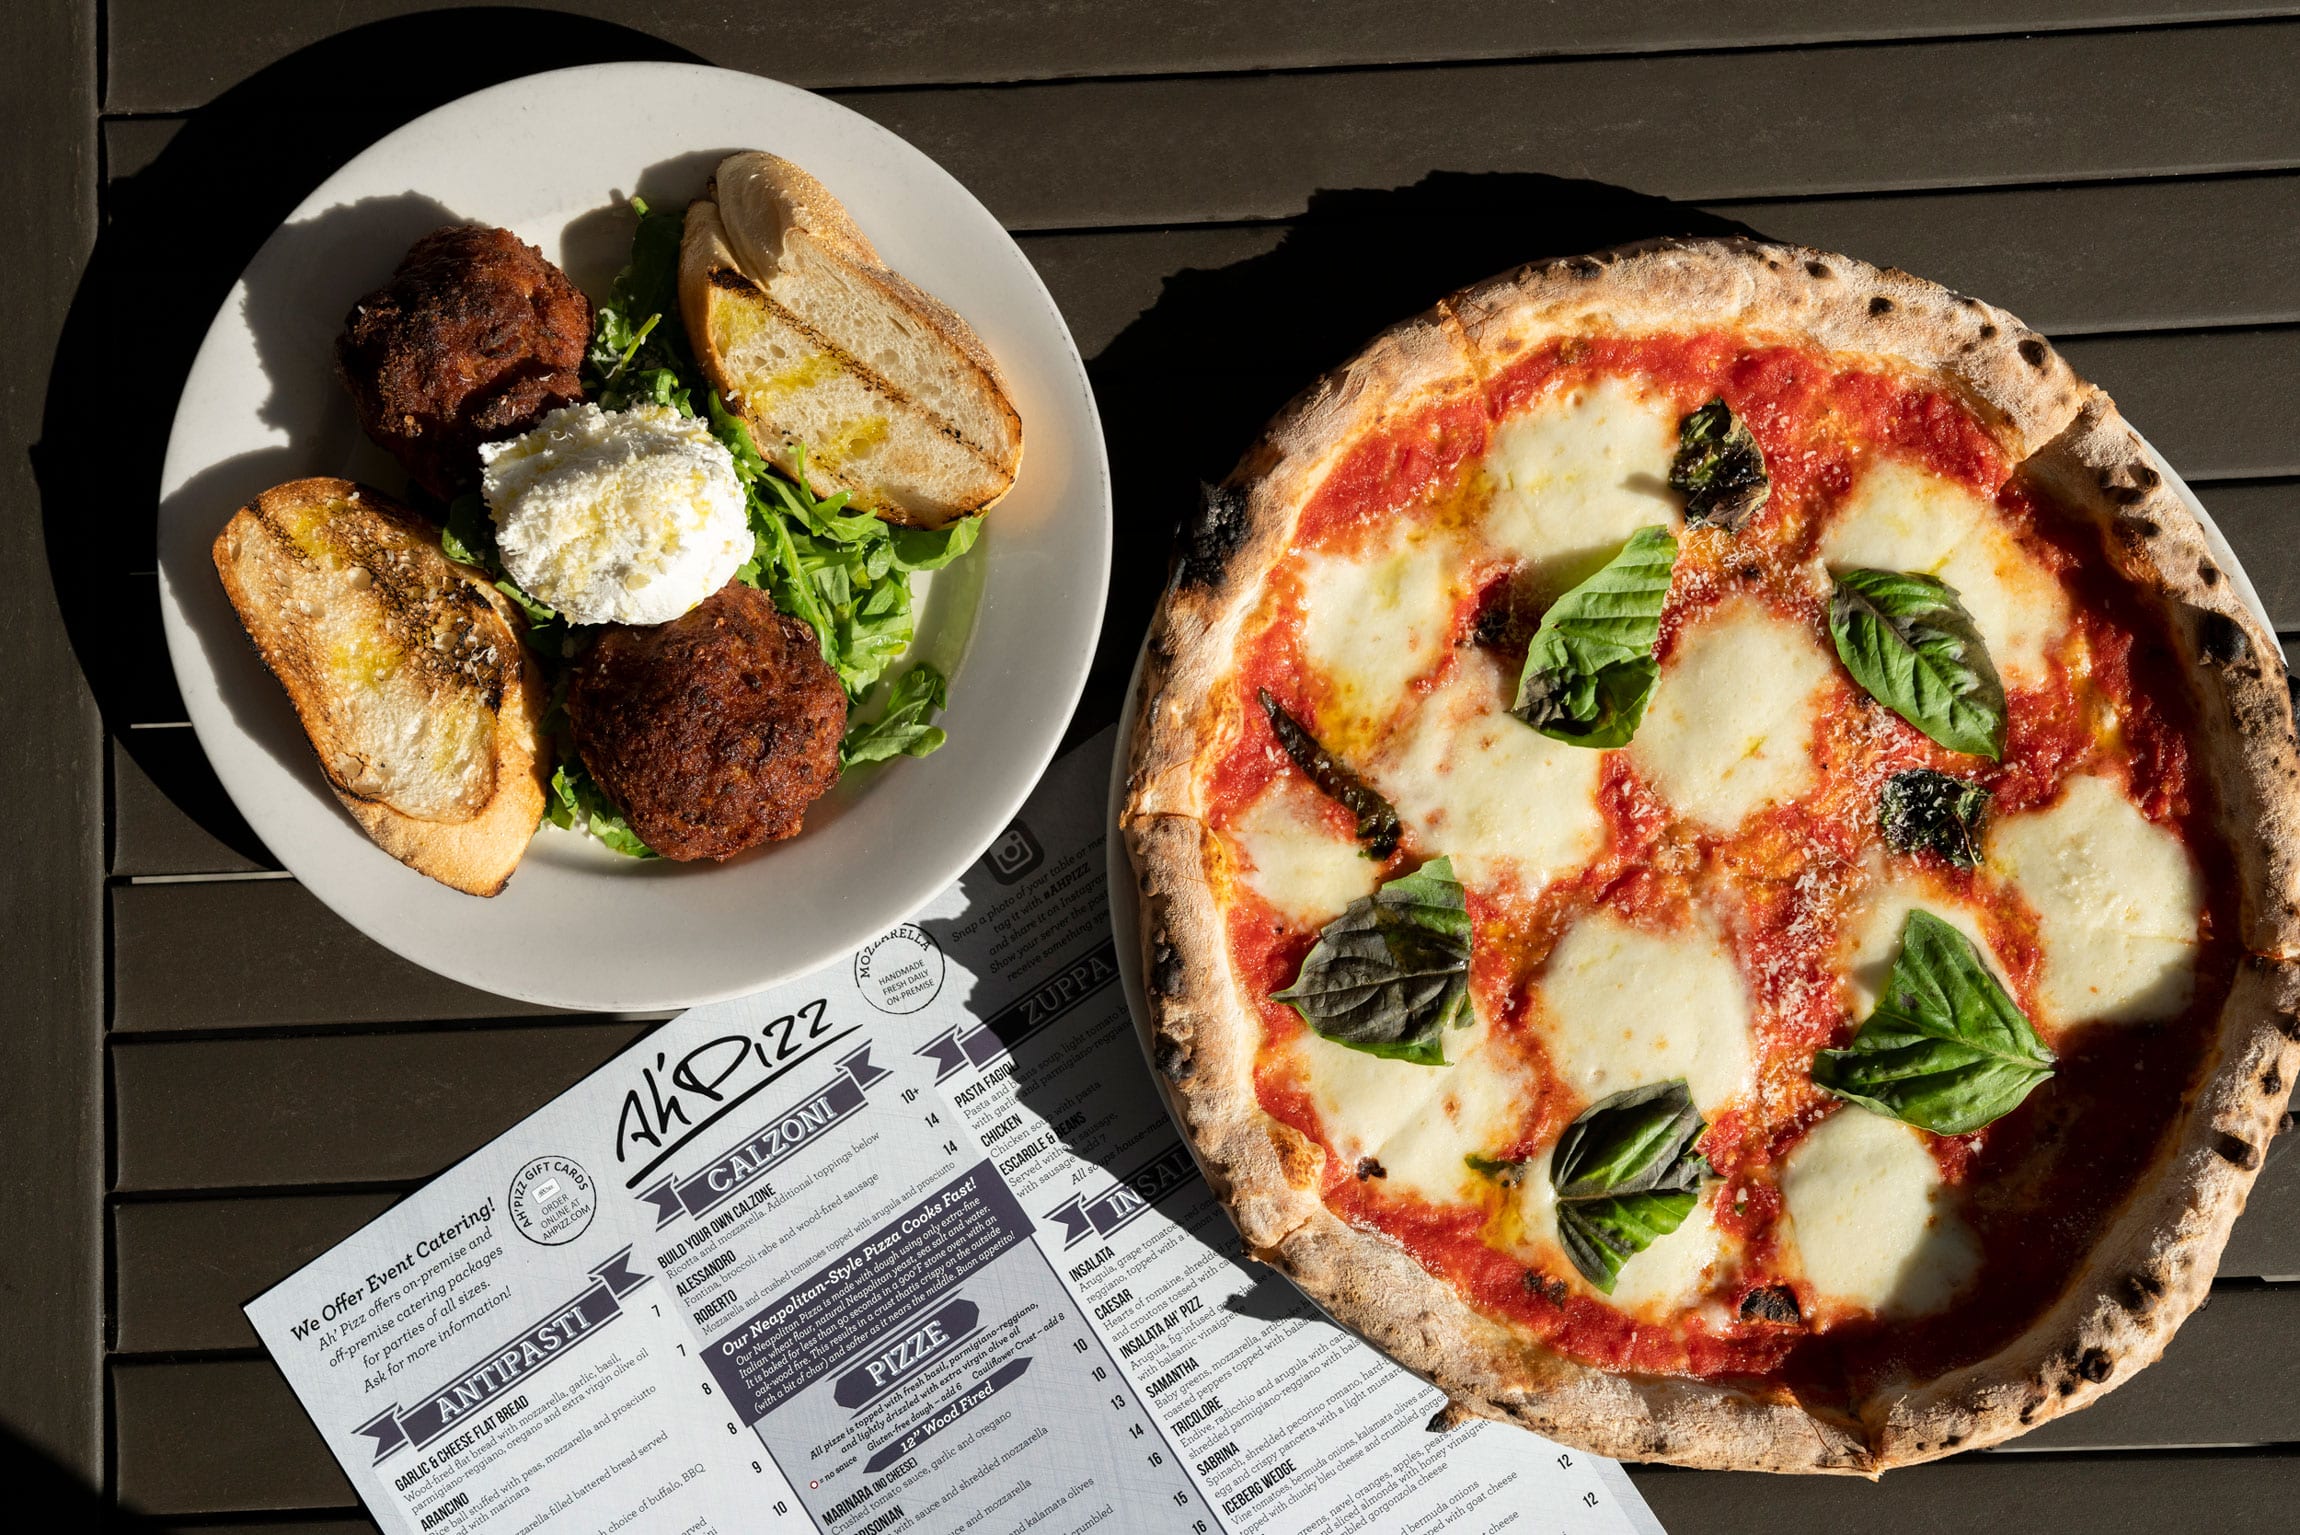 margherita pizza topped with fresh basil and arancini with cheese and grilled bread